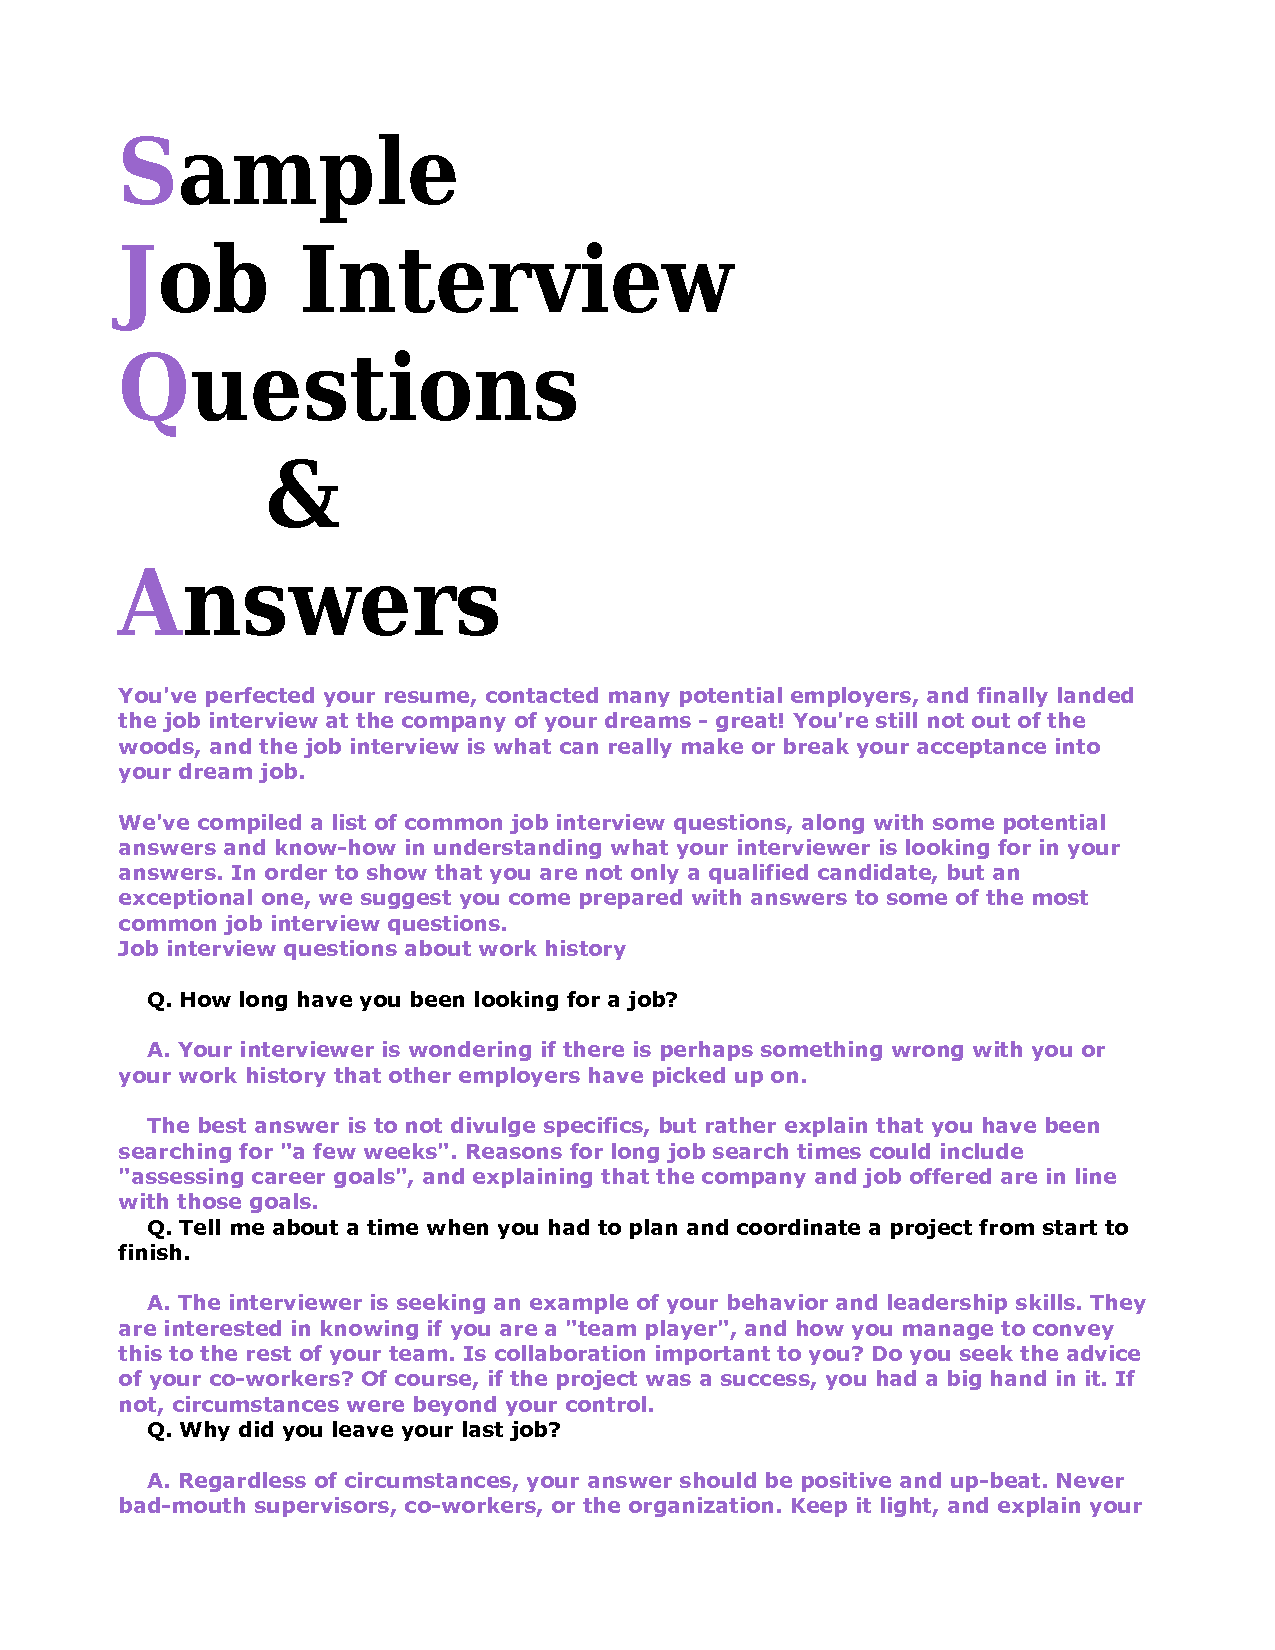 Possible questions in a job interview with answers